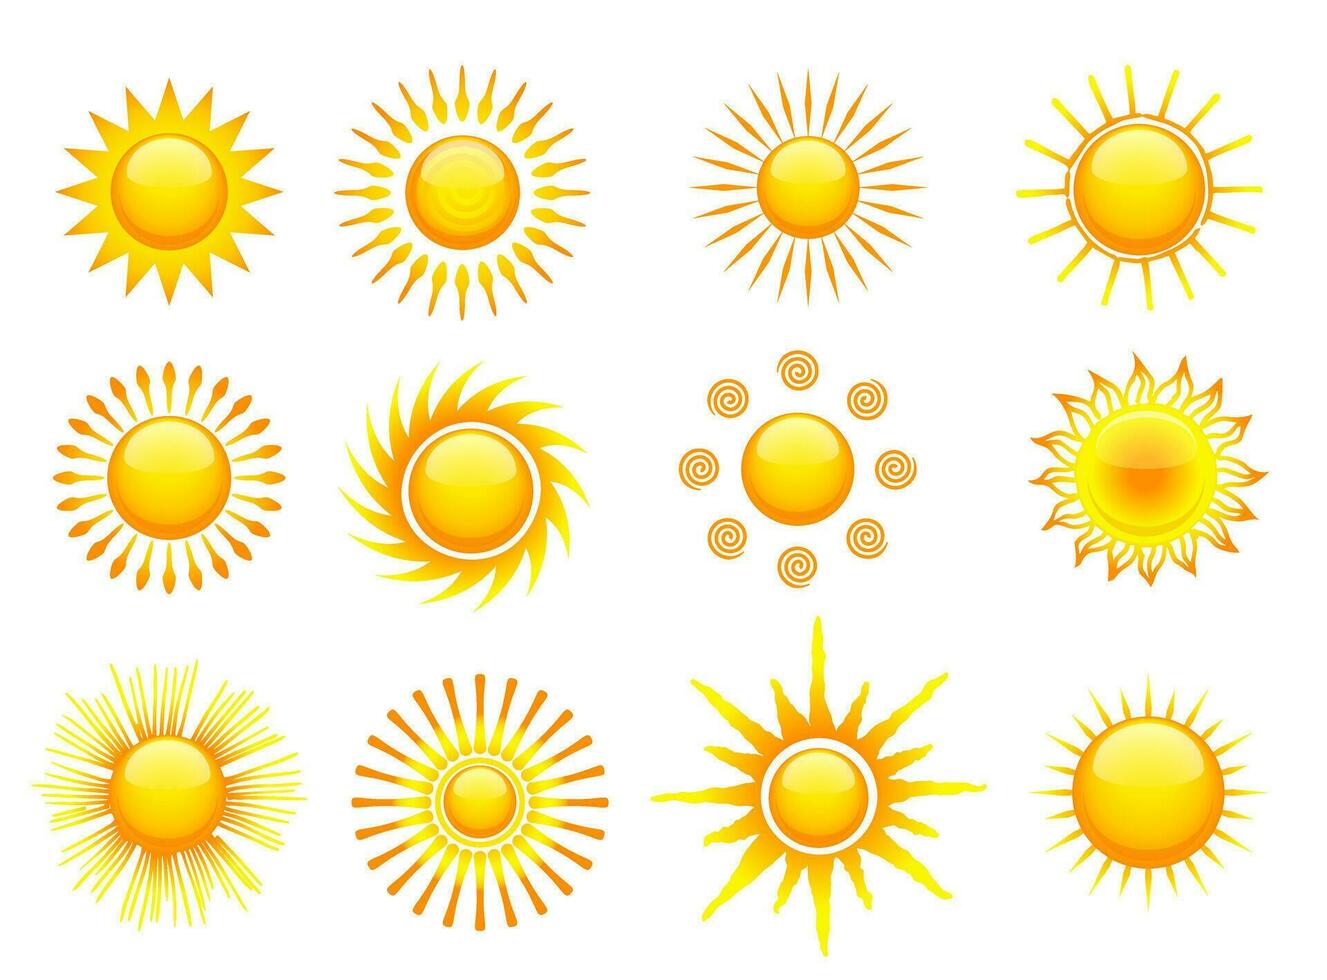 Sun icons vector symbol set. Collection of sun stars for use in as logo or weather icon. Various icons with rays. Vector illustration